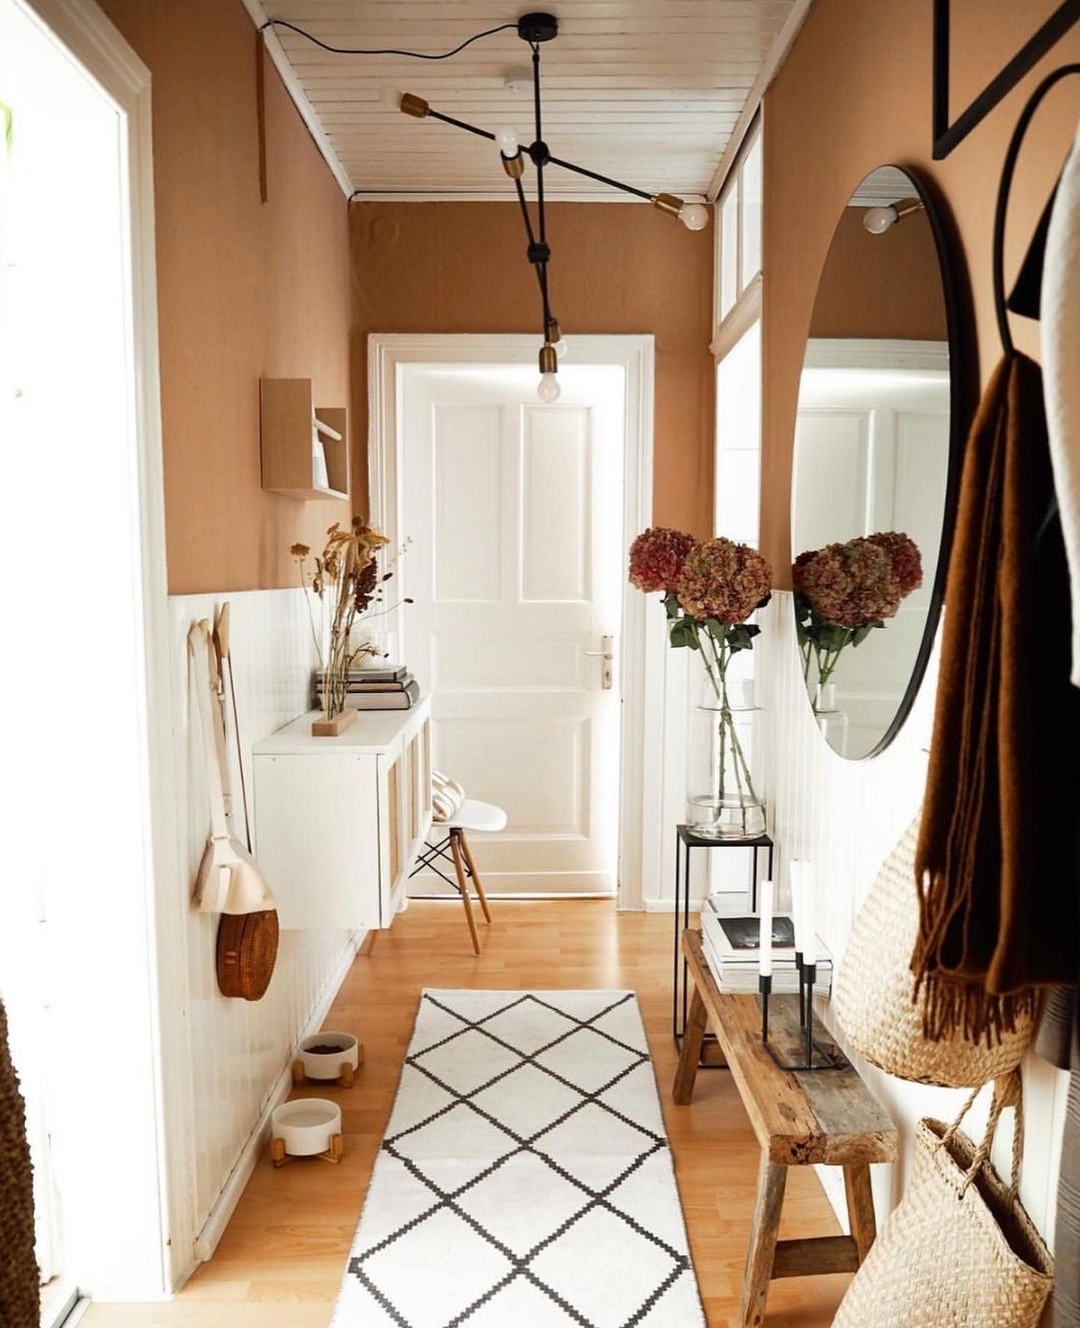 Eclectic styling in hallway